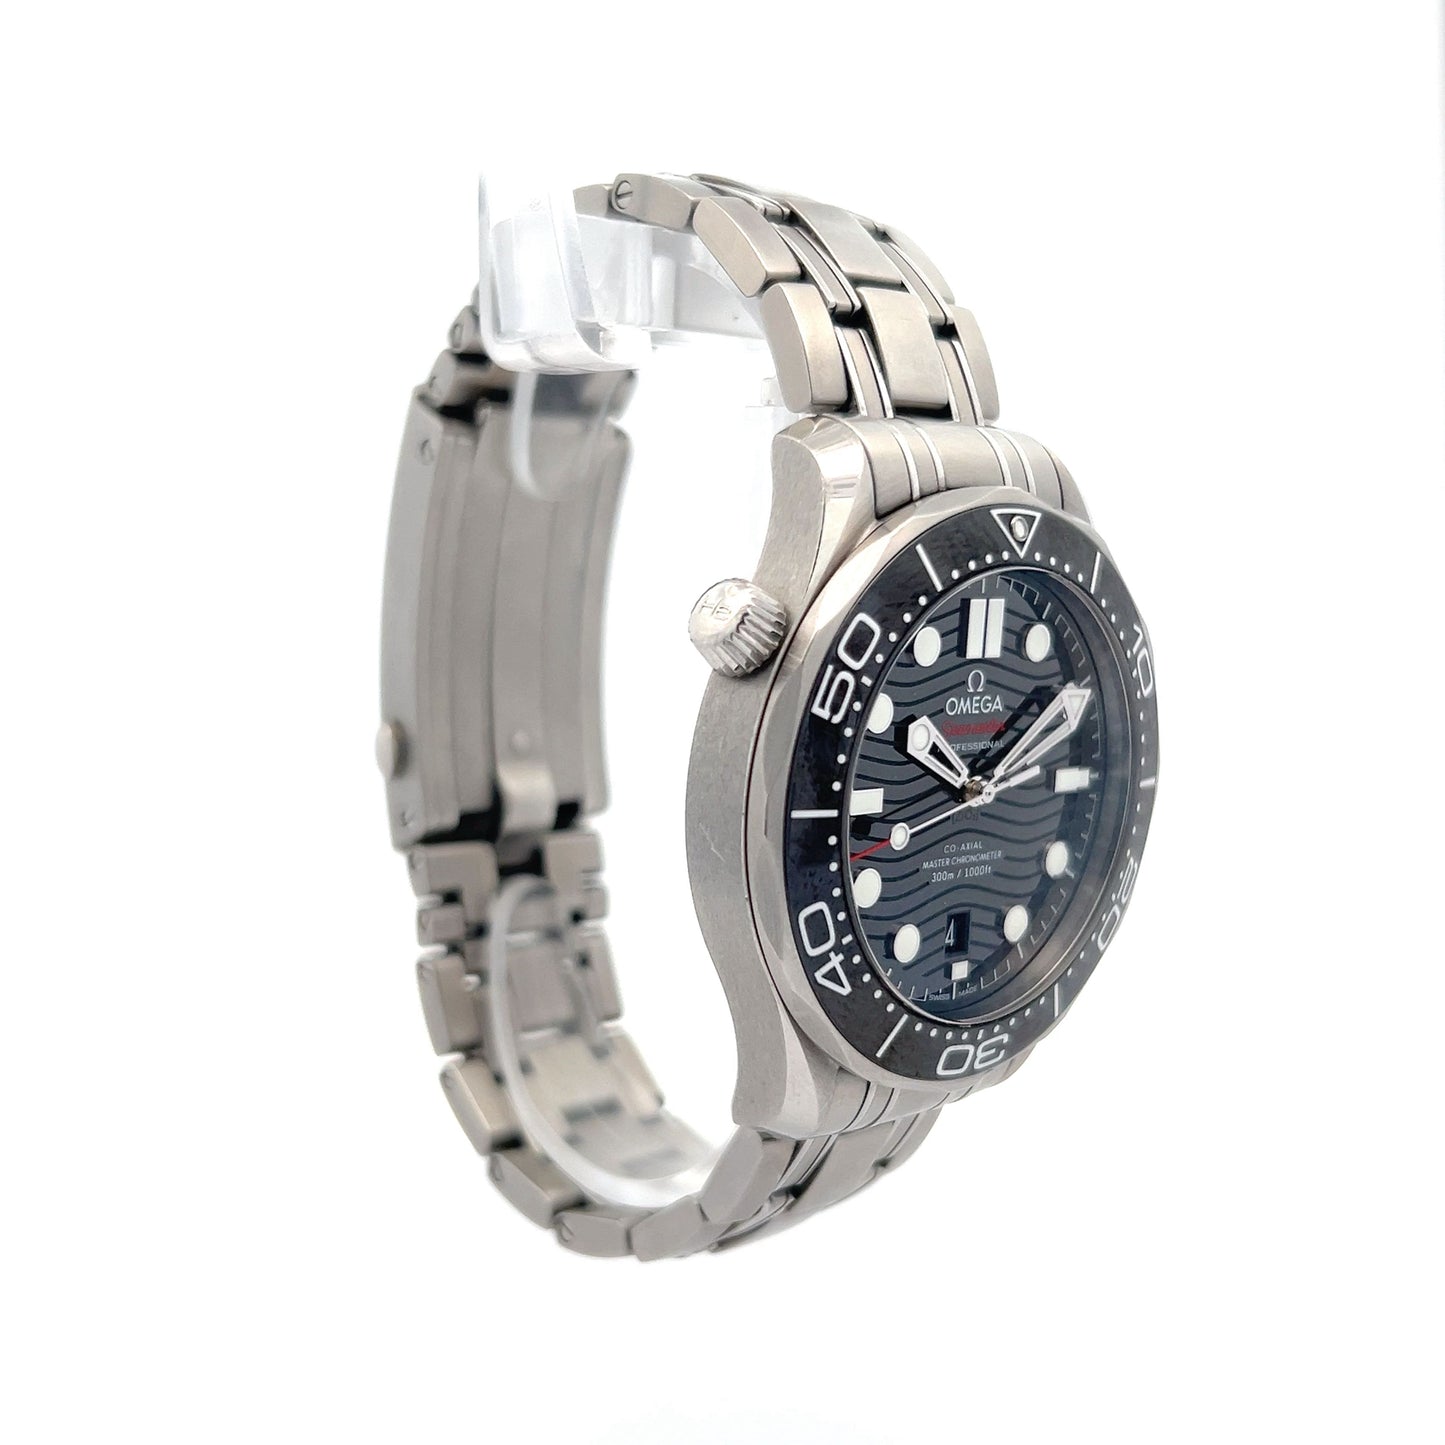 Omega Seamaster Diver 300m 42mm Watch in Stainless Steel